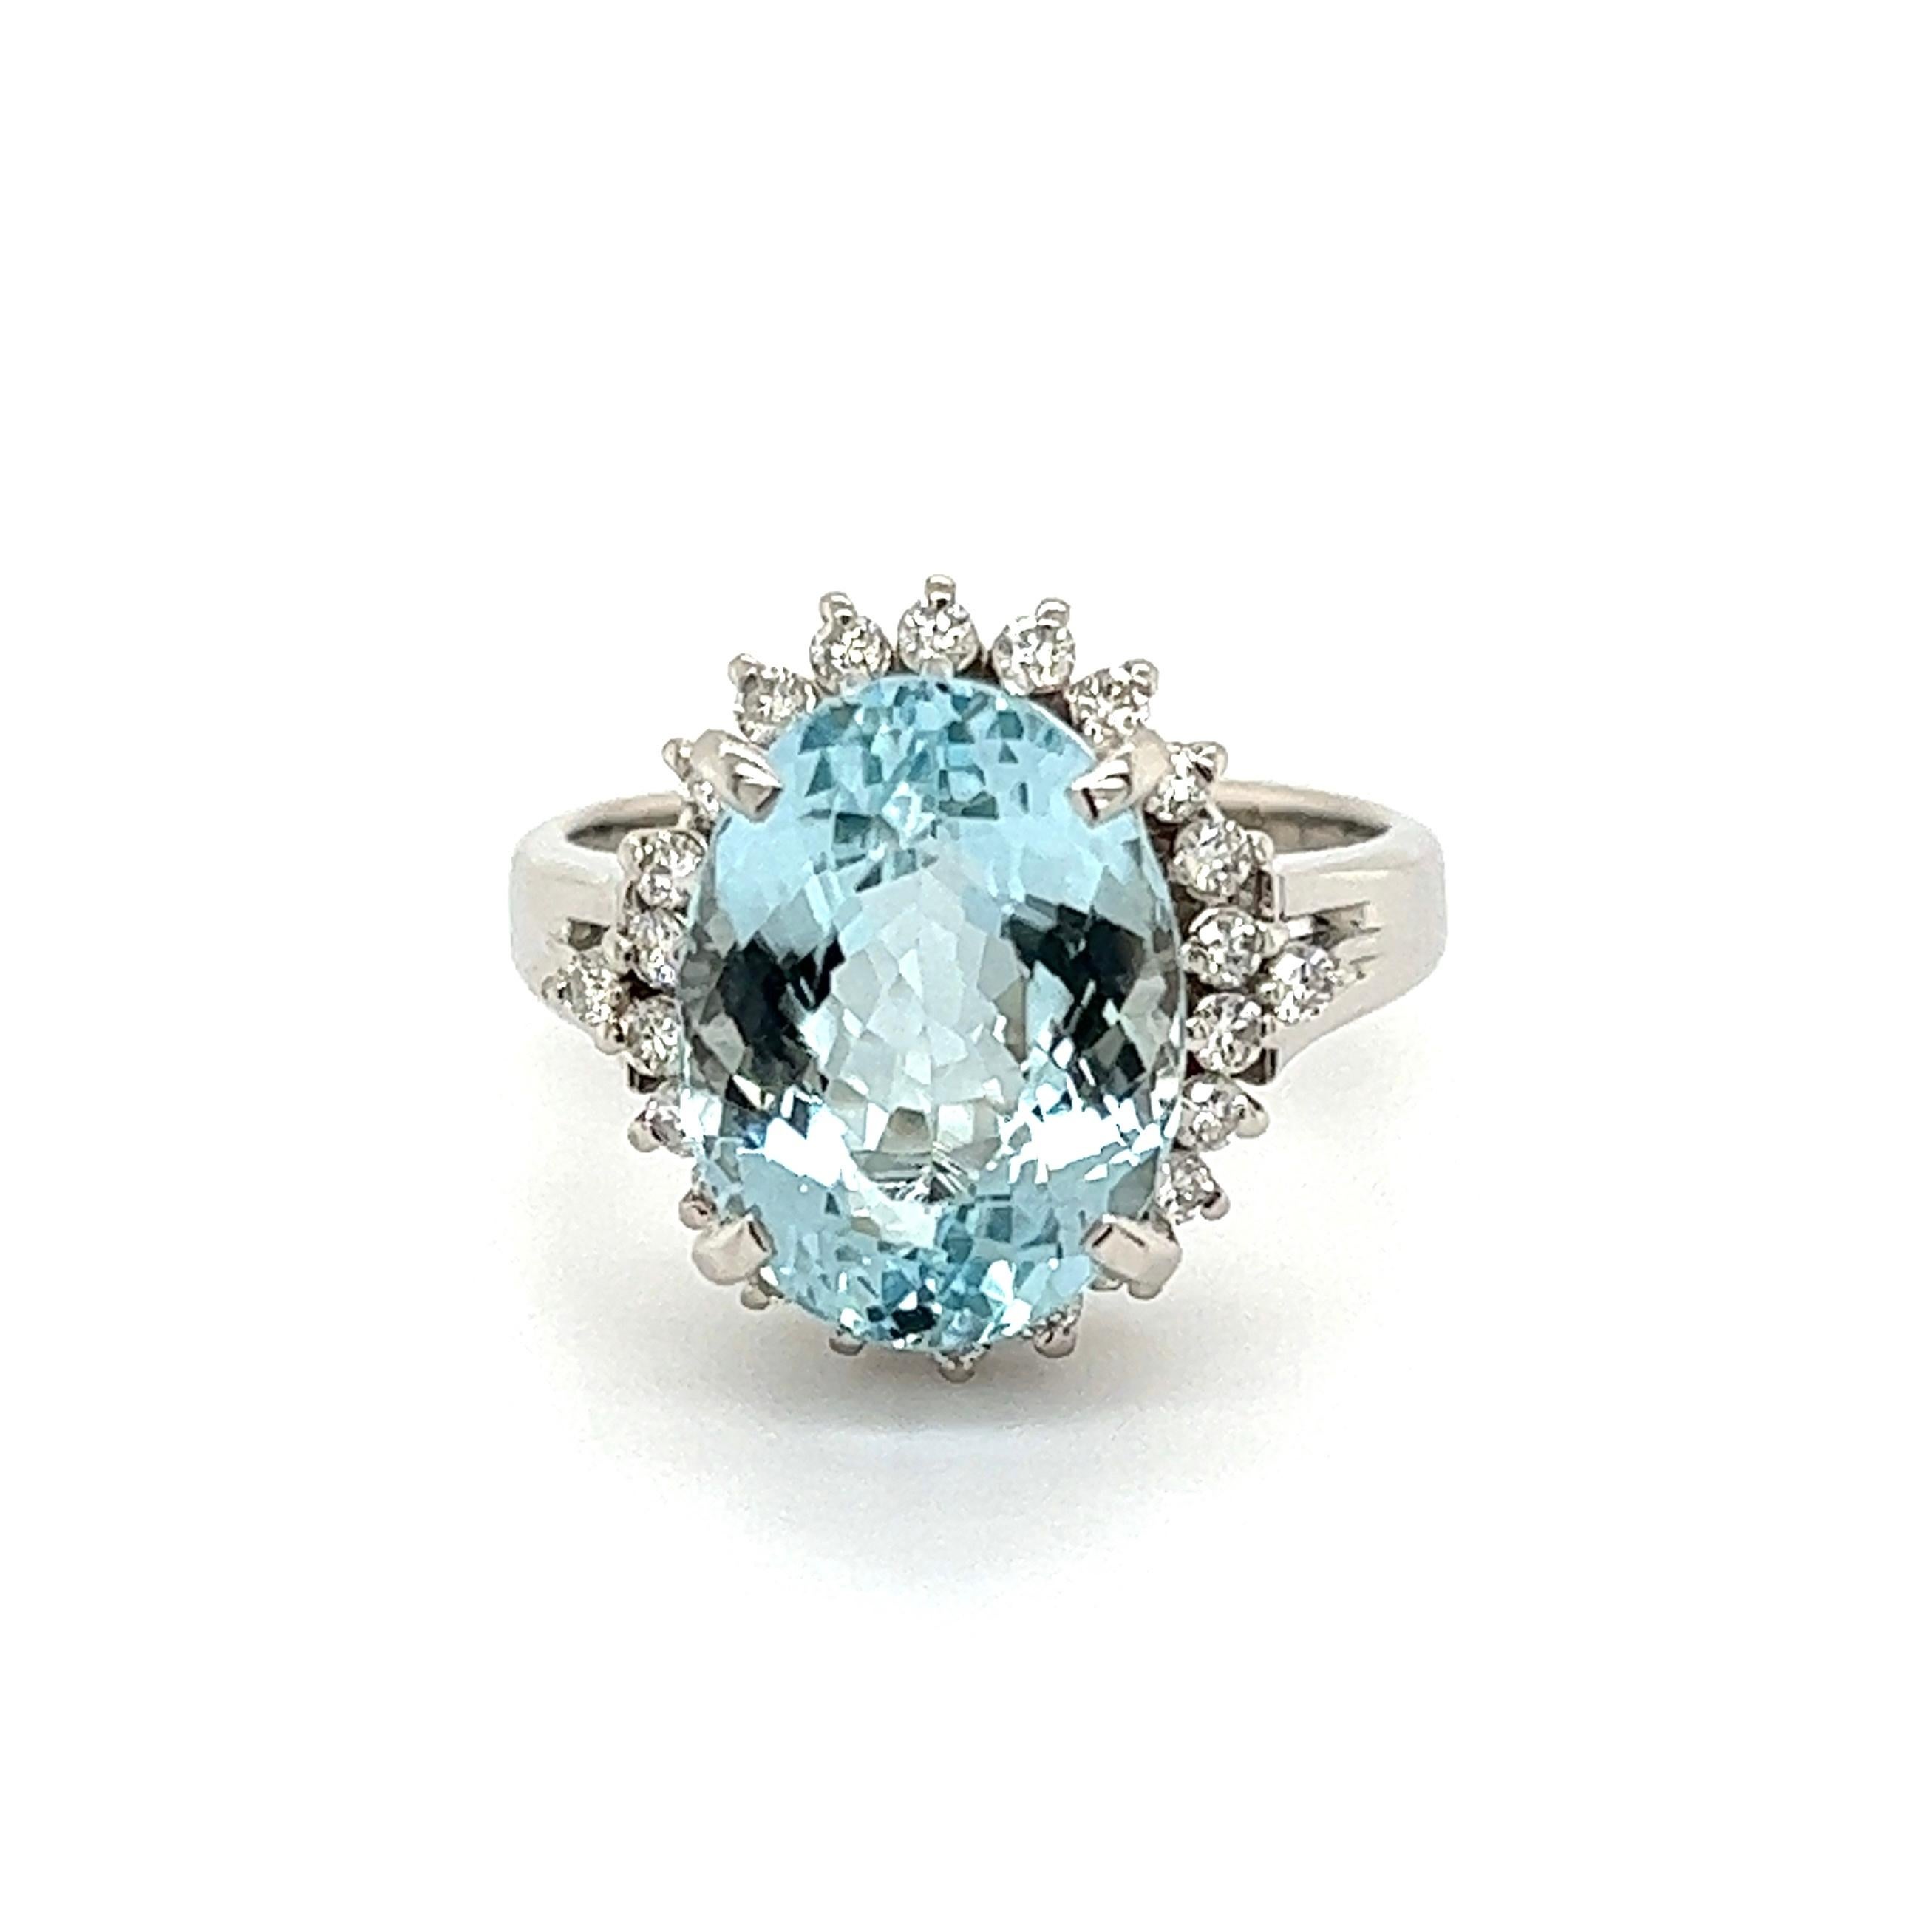 Simply Beautiful! Finely detailed Aquamarine and Diamond Platinum Halo Ring. Centering a securely nestled Oval Aquamarine, weighing approx. 4.48 Carats surrounded by Diamonds, approx. 0.29tcw. Approx. dimensions: 1.02” l x 0.74” w x 0.60” h. Hand